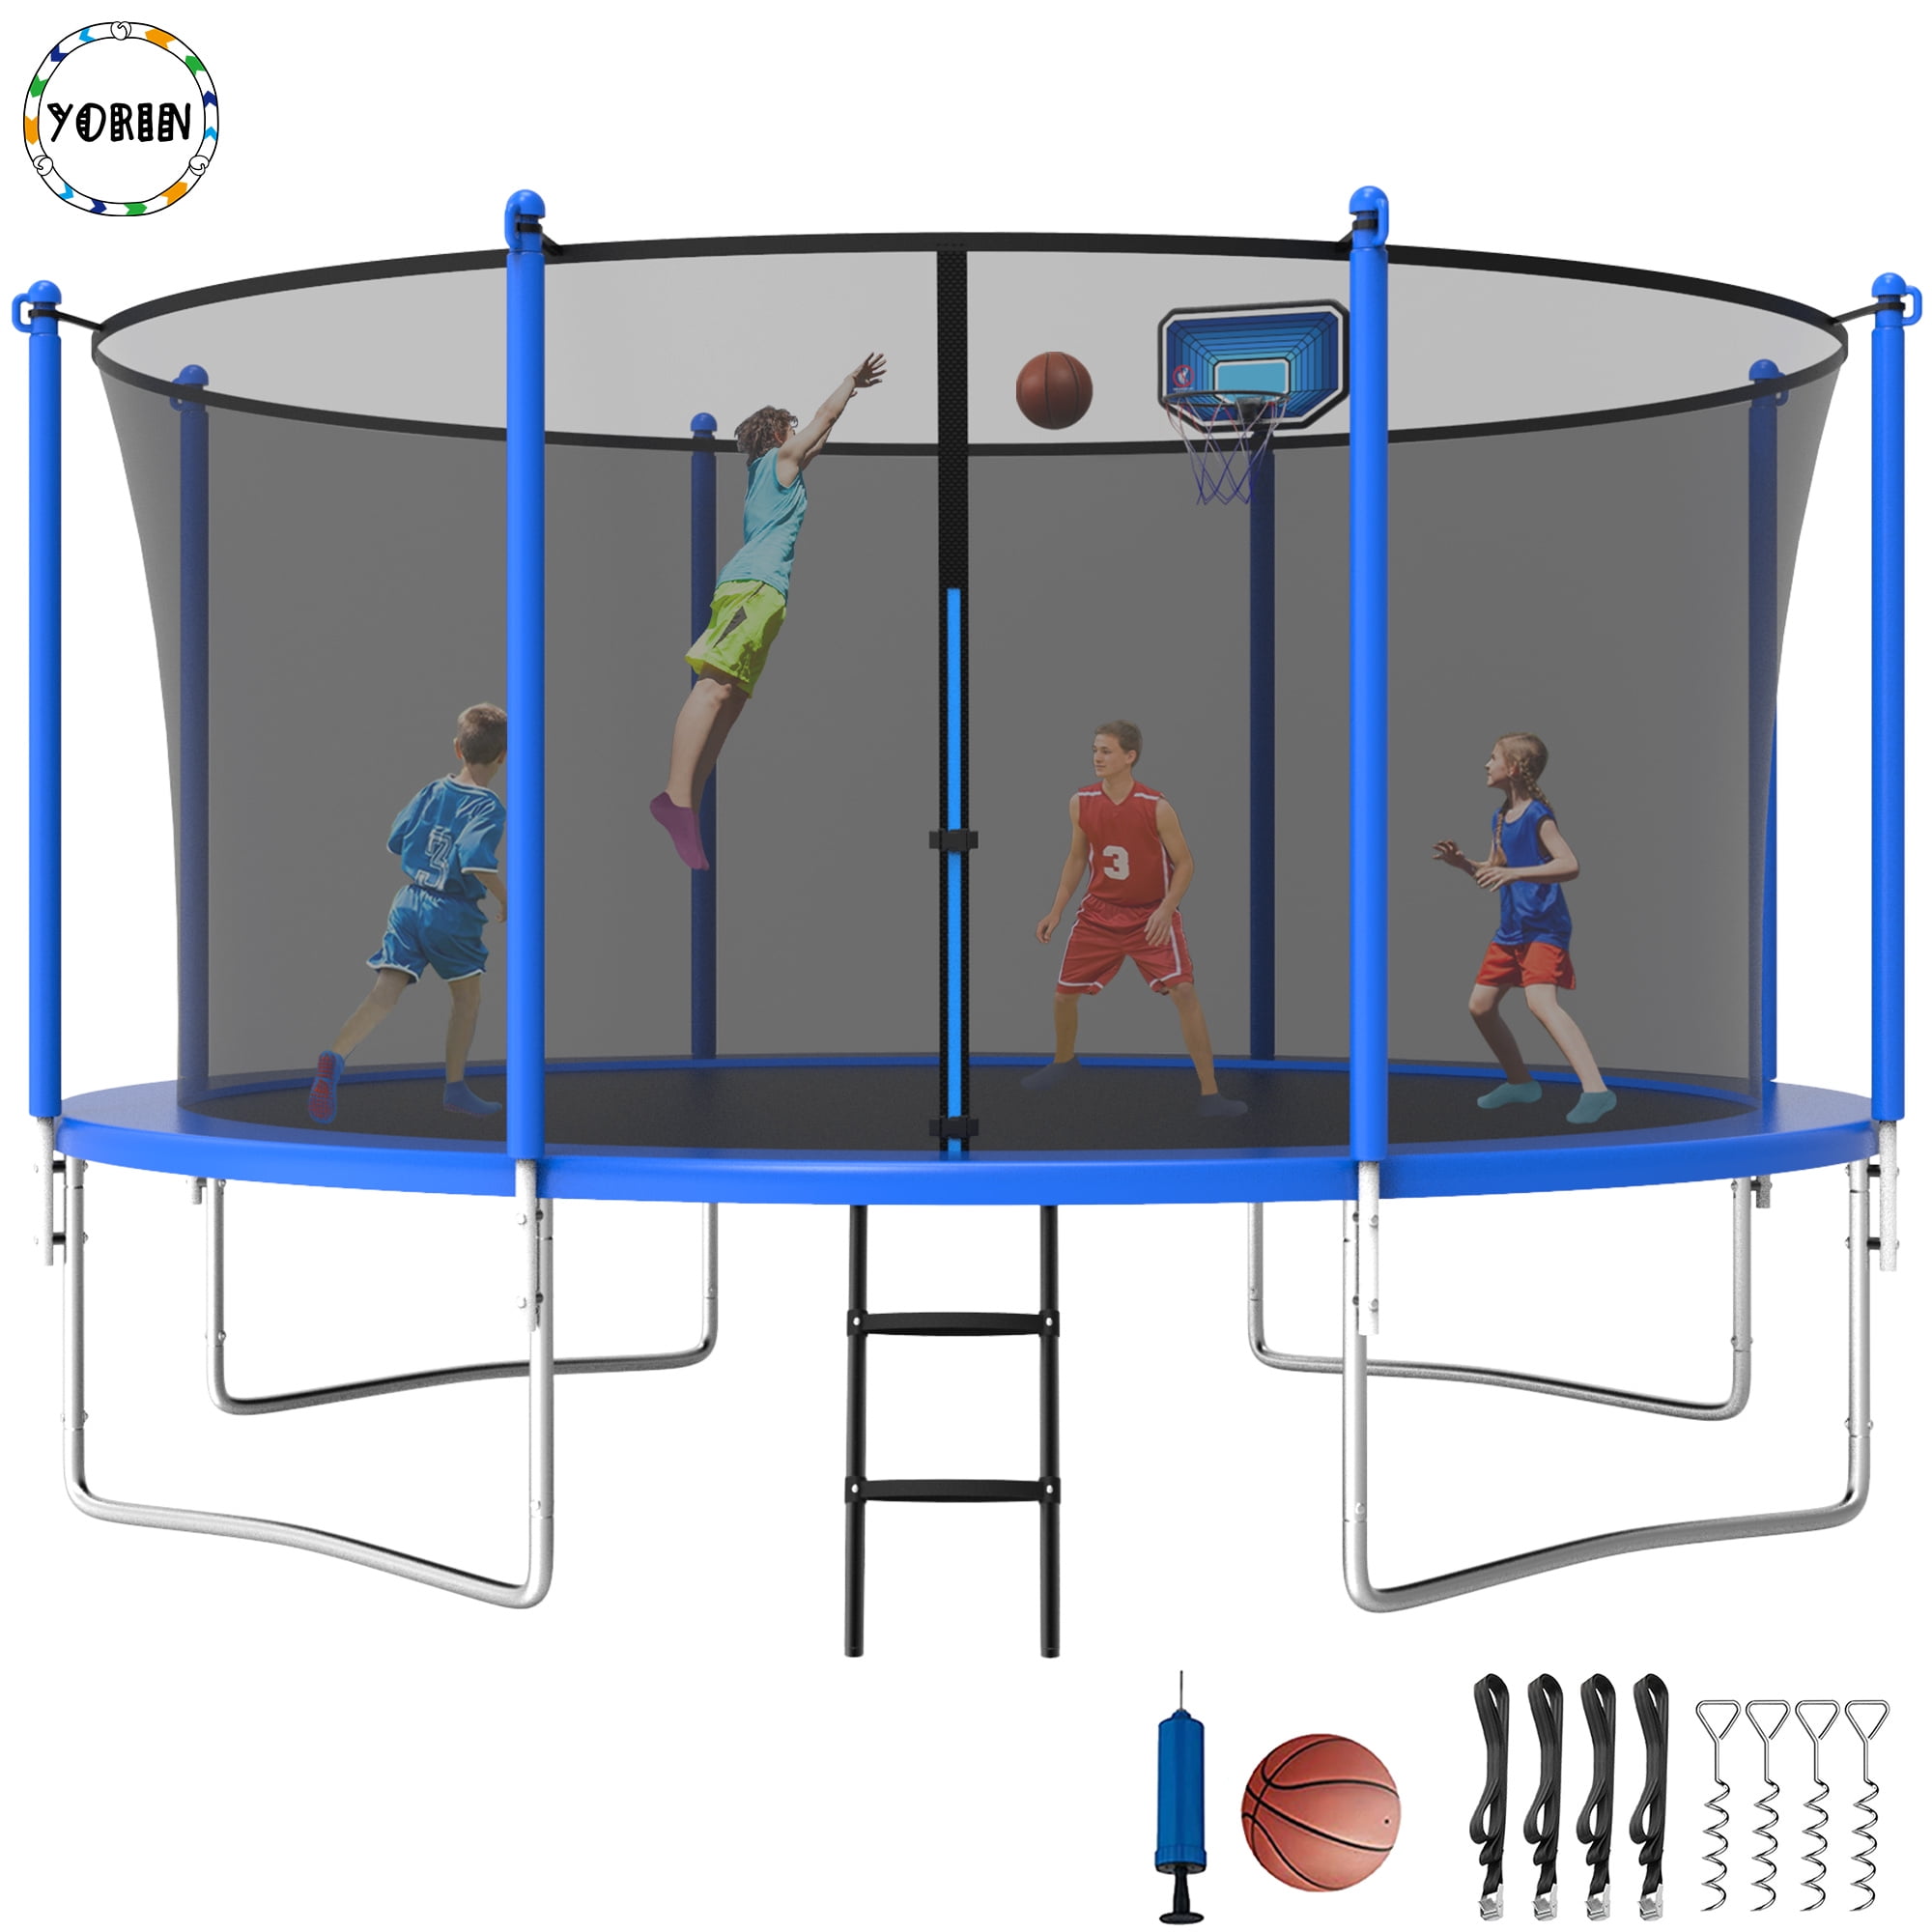 YORIN Trampoline, 14FT Trampoline with Enclosure Net, 1400LBS ...